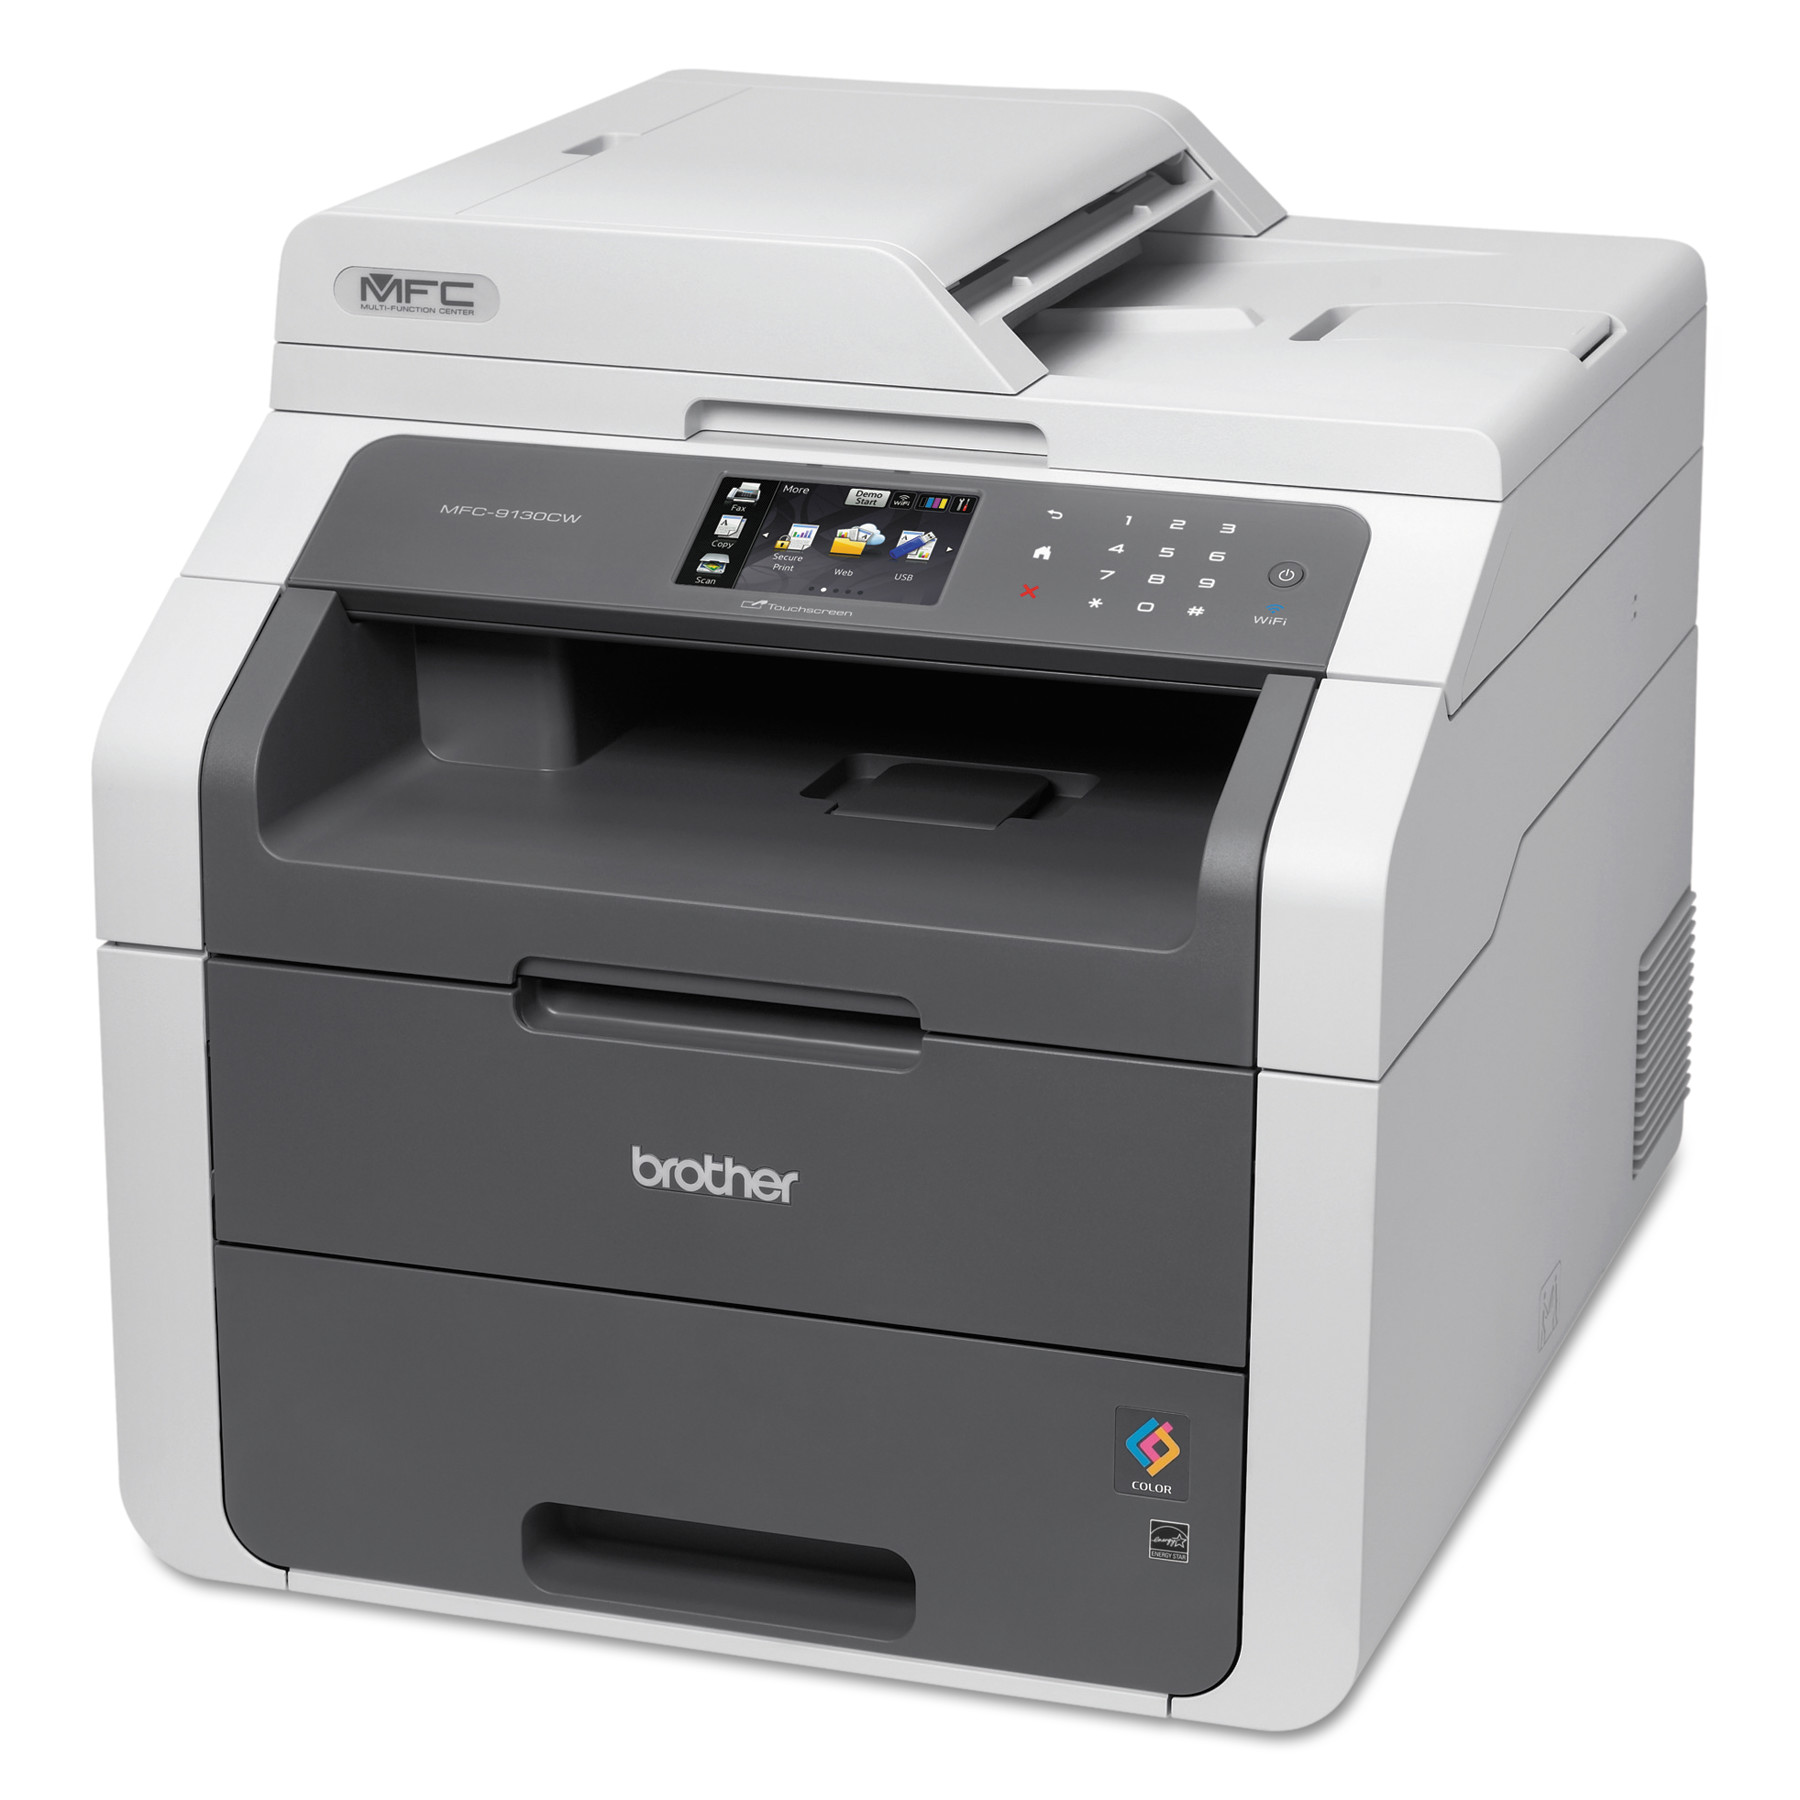 Brother MFC-9130CW Digital Color All-in-One with Wireless Networking Printer/Copier/Scanner/Fax Machine - image 2 of 3